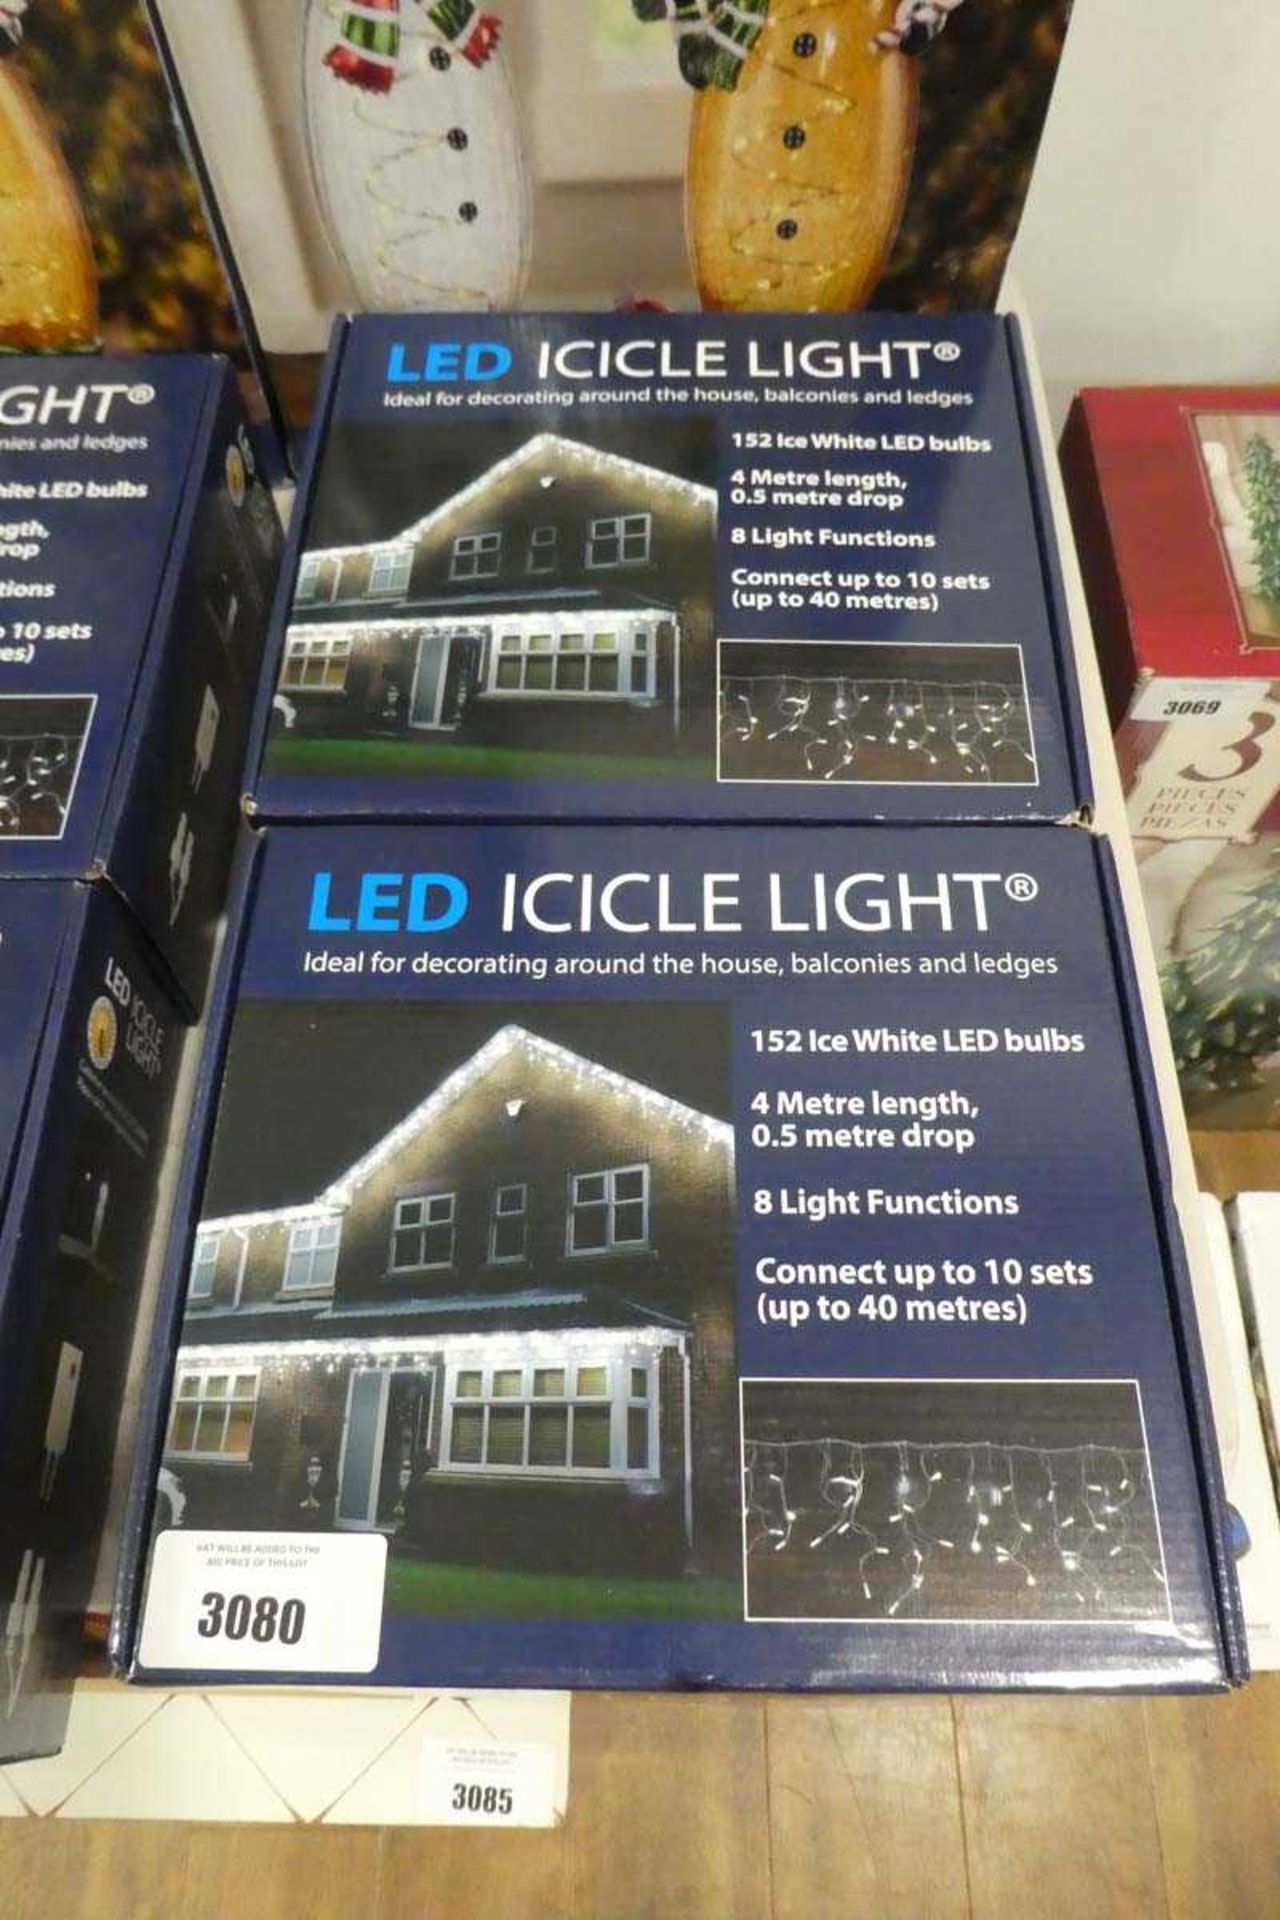 +VAT 2 boxed sets of LED icicle lightss (ice white, 4m length, 0.5m drop, 8 light functions)